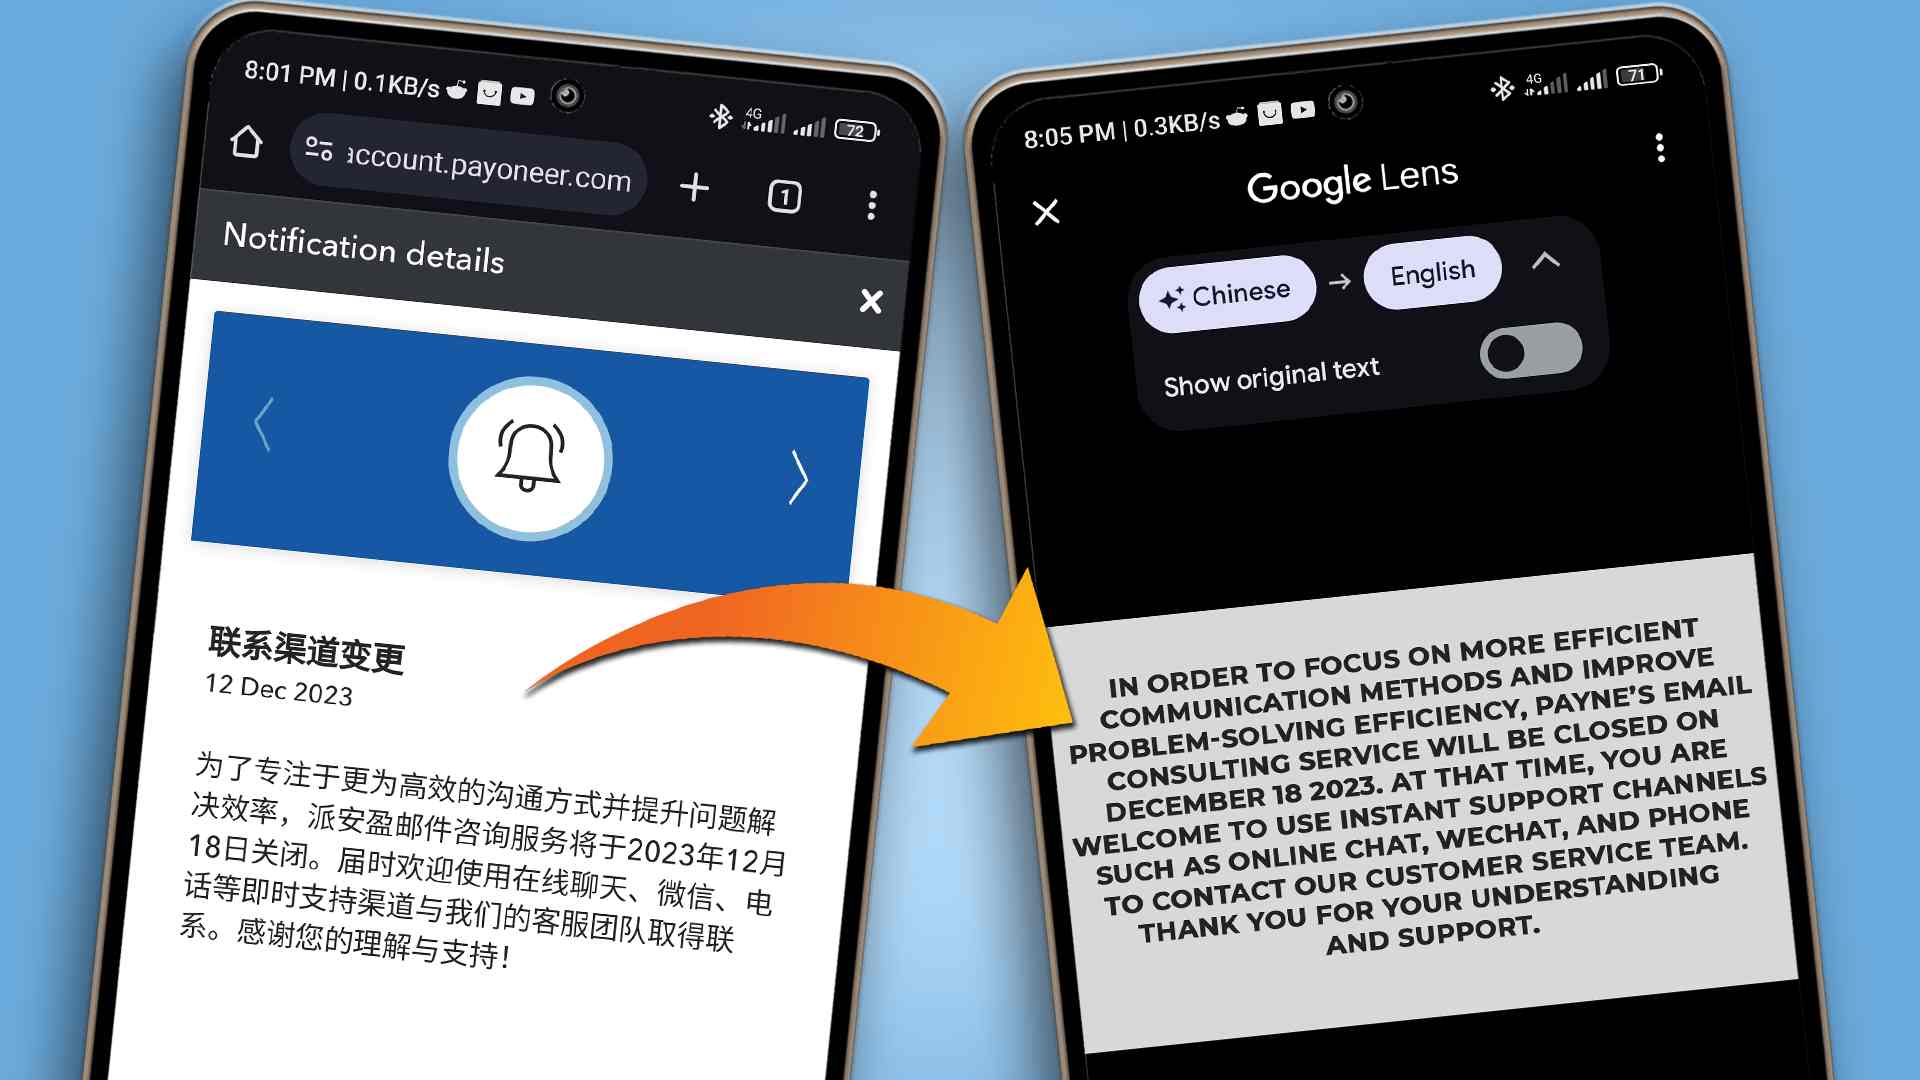 How To Translate Texts In Images Or Screenshots On Your Phone